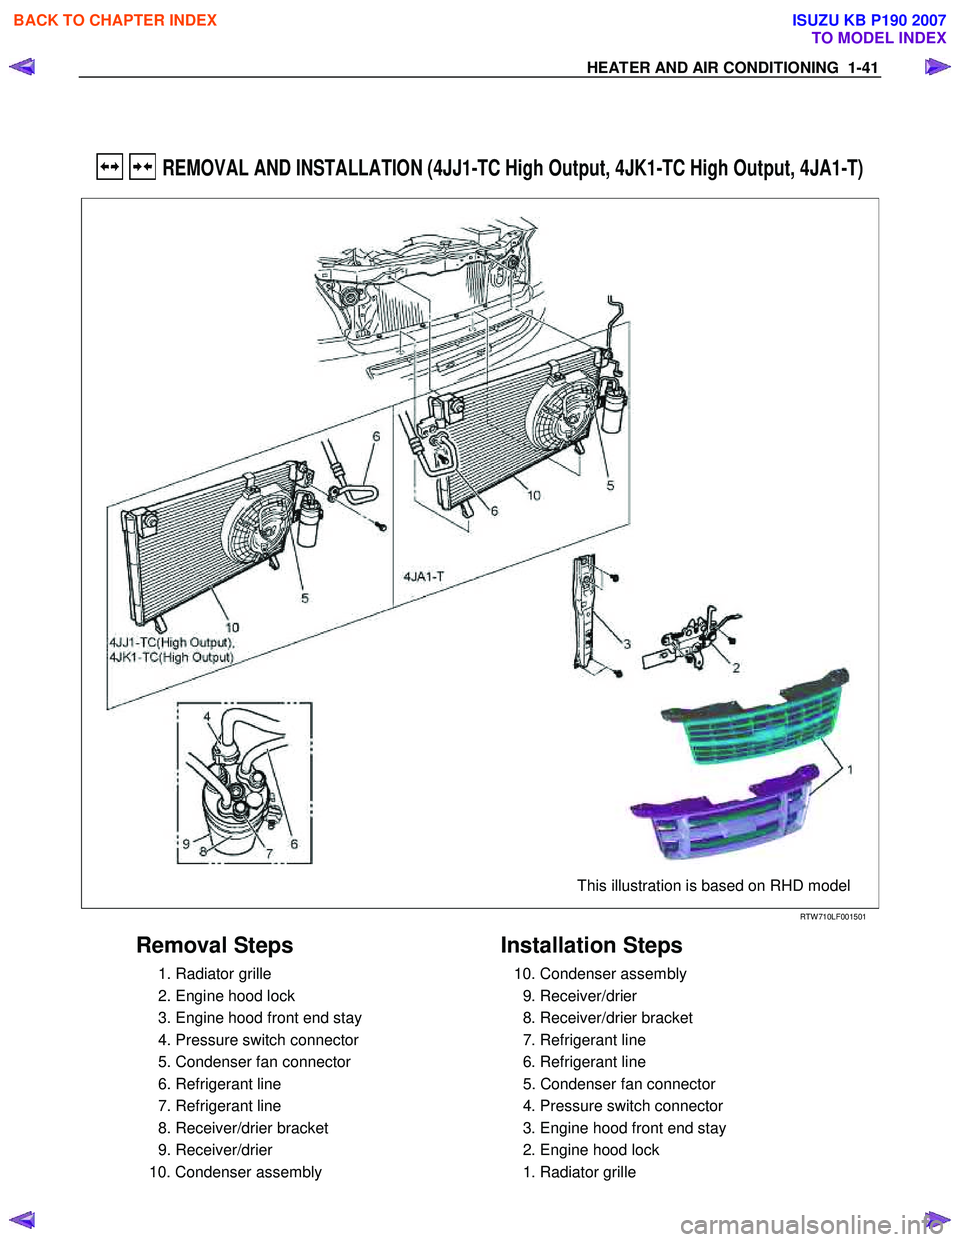 ISUZU KB P190 2007  Workshop Repair Manual HEATER AND AIR CONDITIONING  1-41 
 
  REMOVAL AND INSTALLATION (4JJ1-TC High Output, 4JK1-TC High Output, 4JA1-T) 
  
 
 
 
This illustration is based on RHD model
 
 
RTW 710LF001501 
 
Removal Step